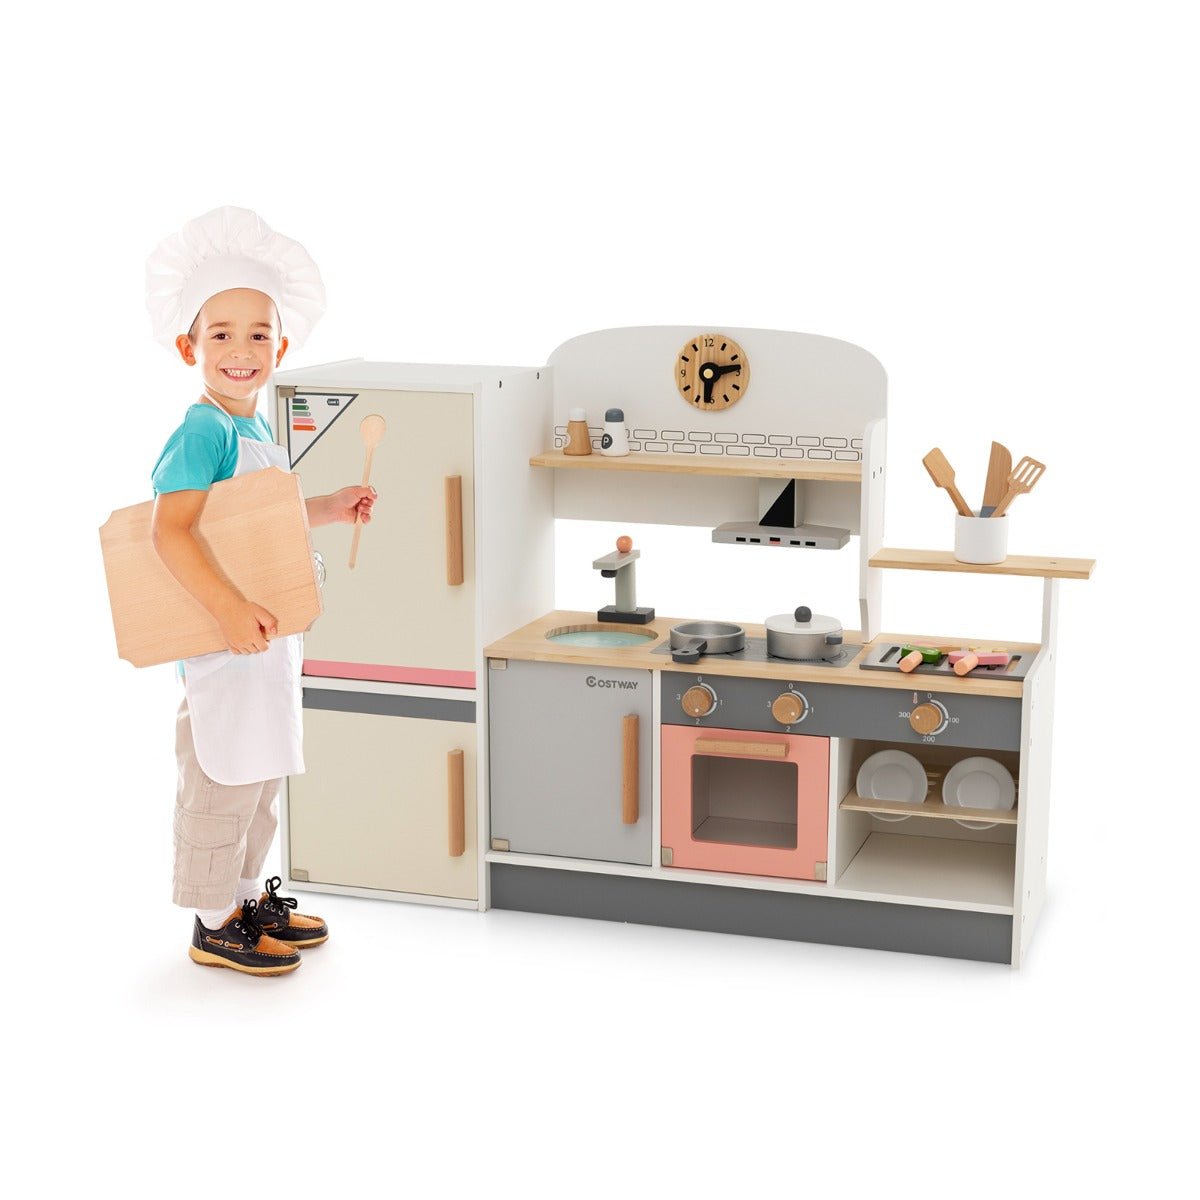 Costway Kids Little Chef Play Kitchen Set with Range Hood for Toddlers Age 3 +